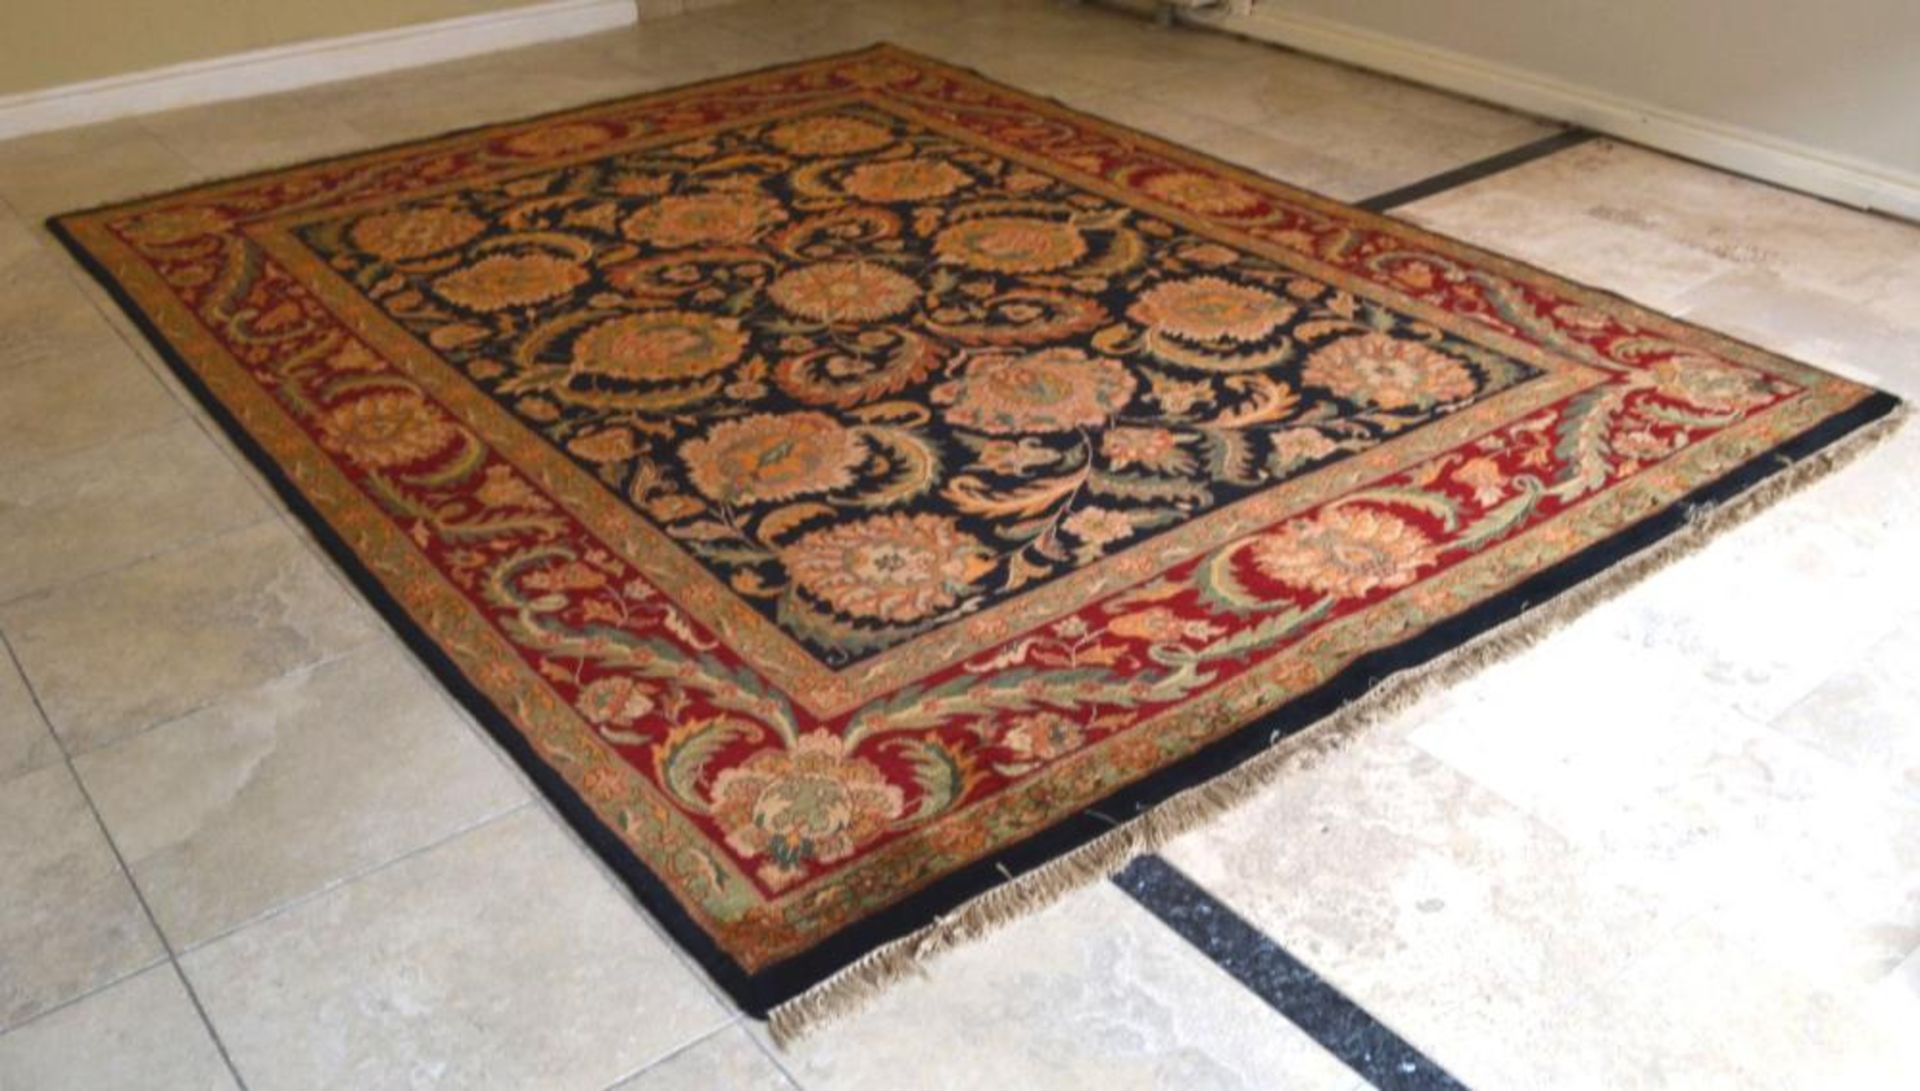 1 x Red and Black Jaipur Handknotted Carpet - Handwoven In Jaipur With Handspun Wool And Vegetable - Image 9 of 16